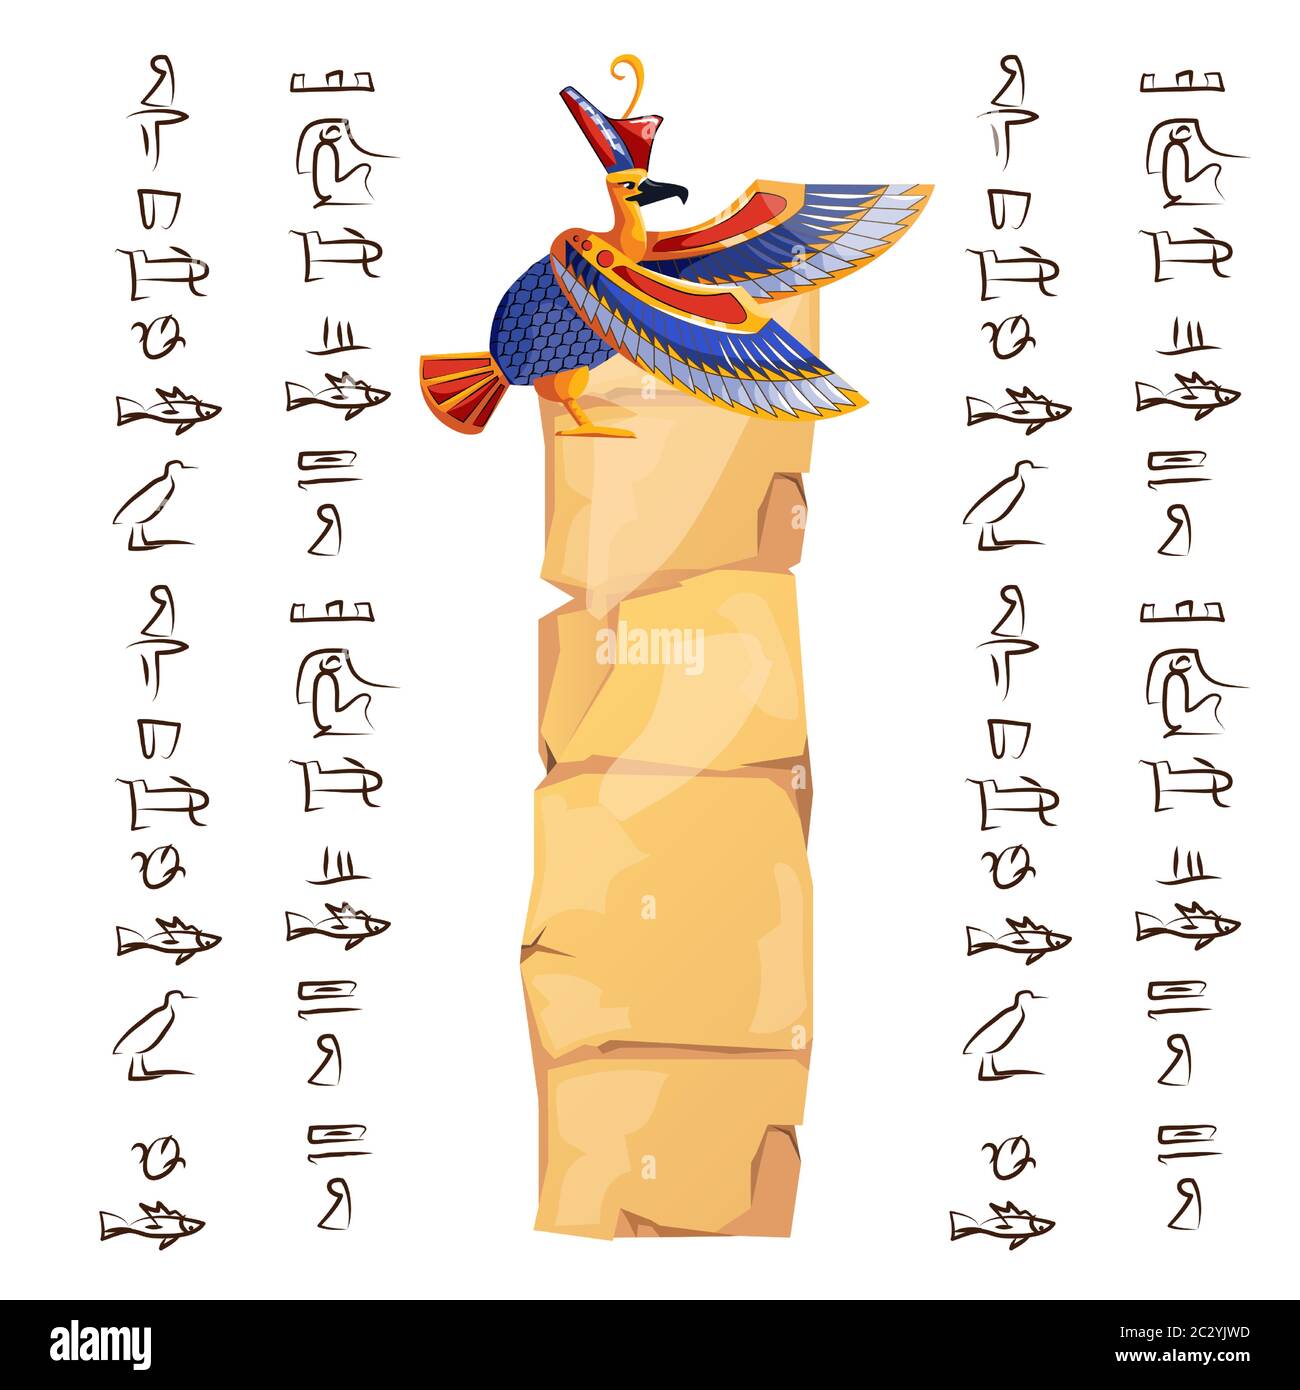 Ancient Egypt papyrus part or or stone column with sacred bird figure cartoon vector illustration. Egyptian culture symbol, blank unfolded ancient pap Stock Vector